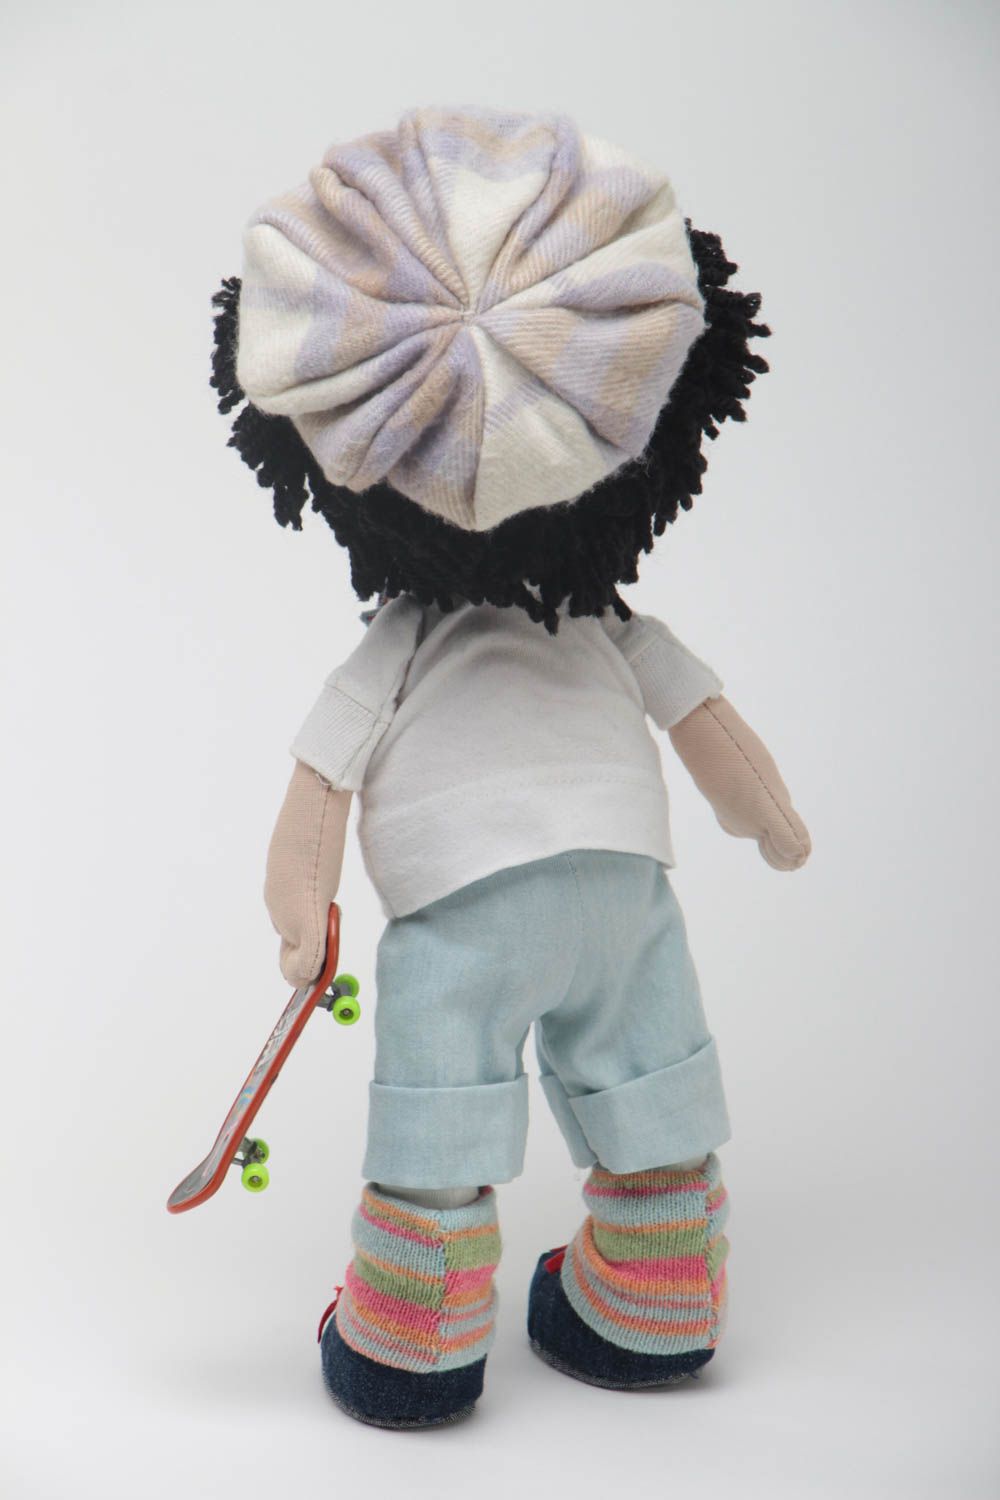 Unusual handcrafted rag doll childrens toy interior decorating gift ideas photo 4